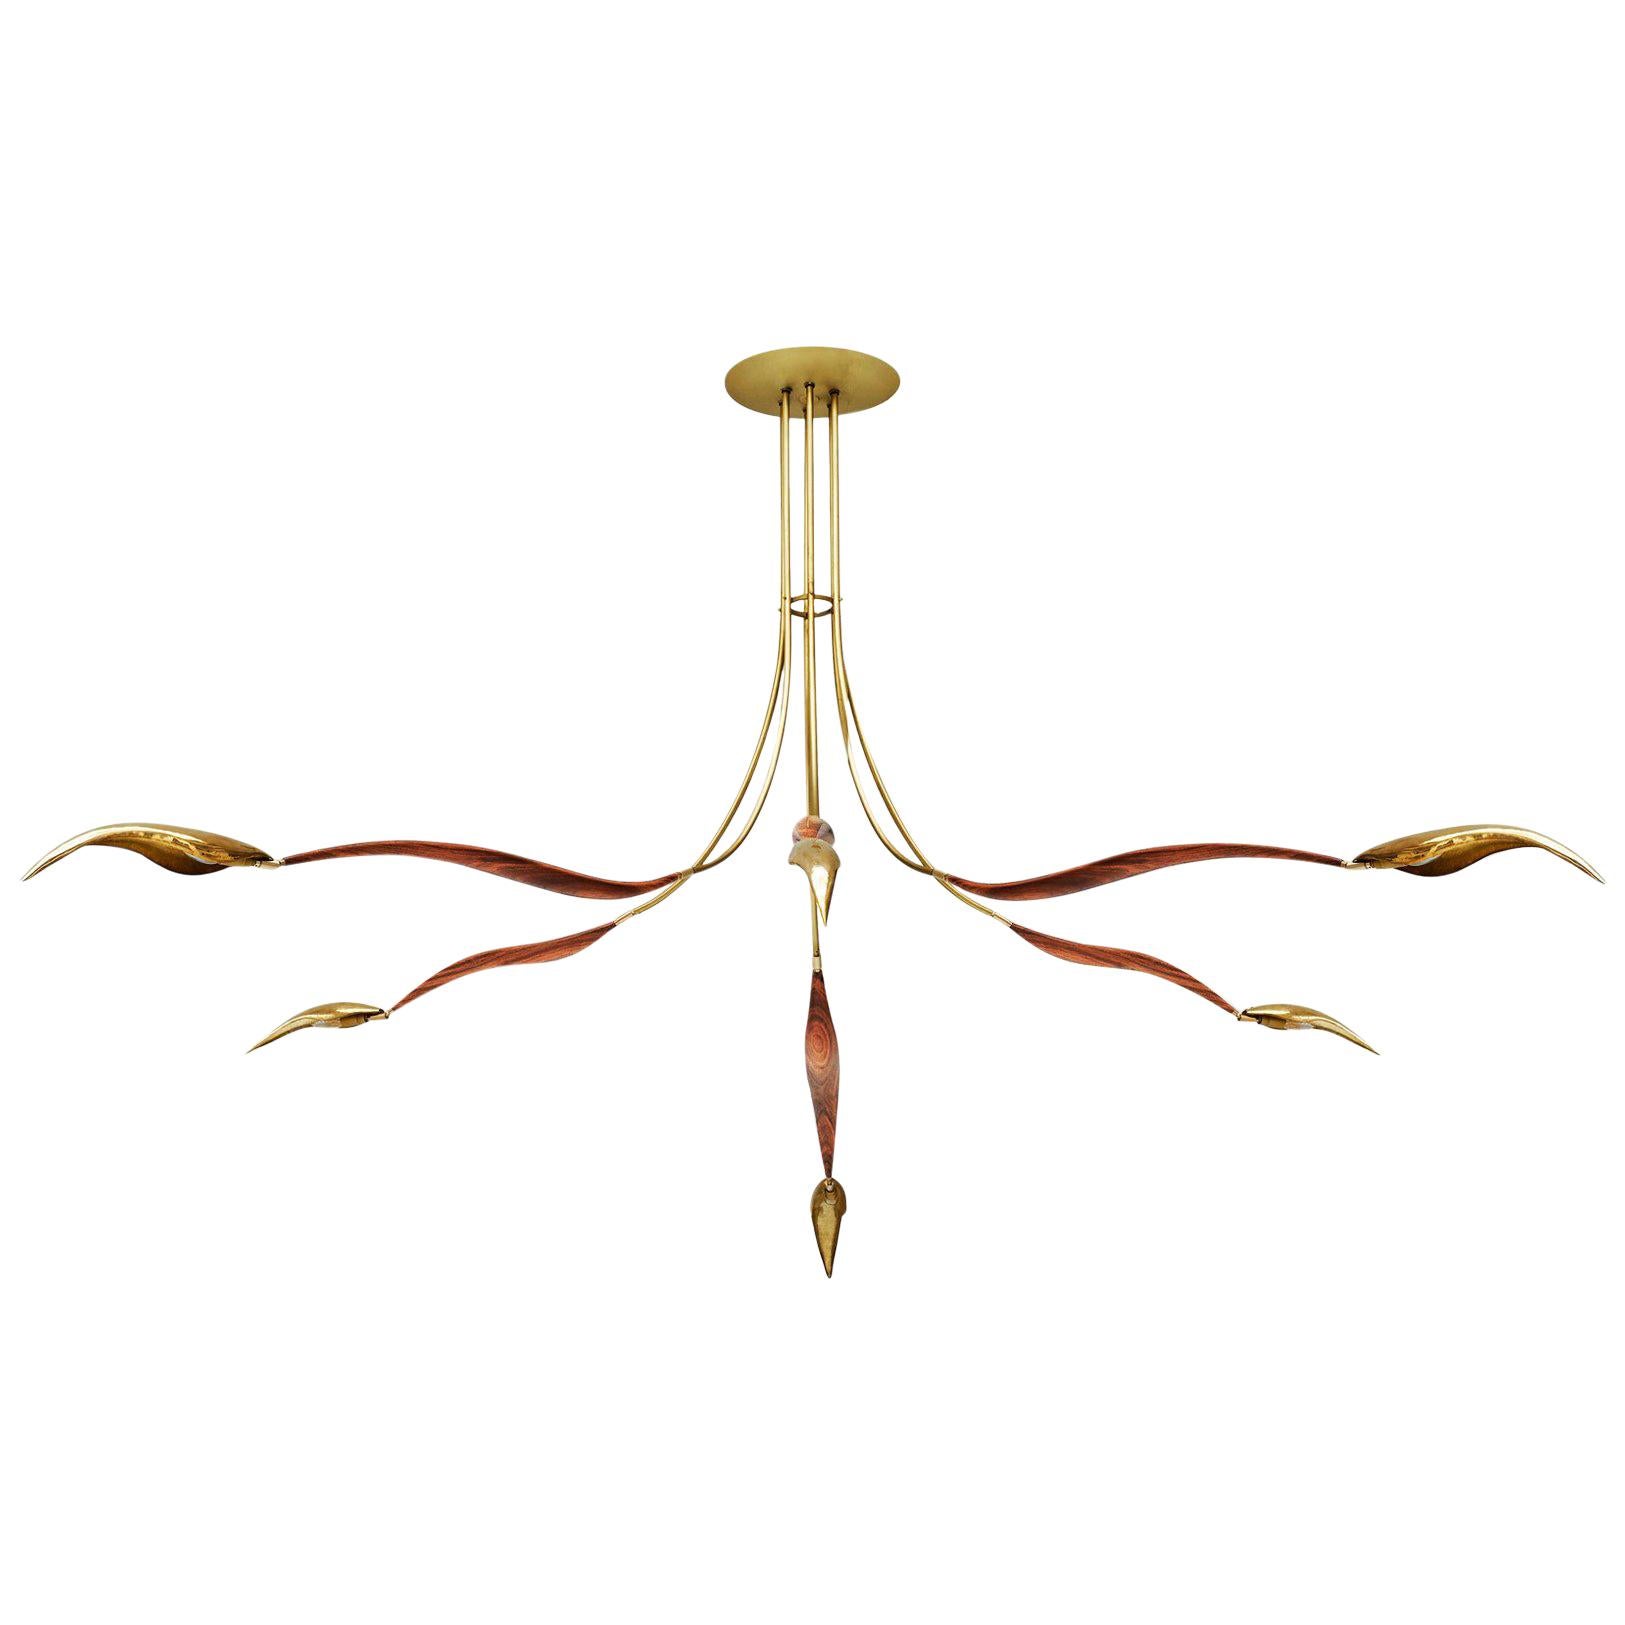 Contemporary Chrysalide Chandelier, Wood and Brass, Oma Light Design, Spain For Sale